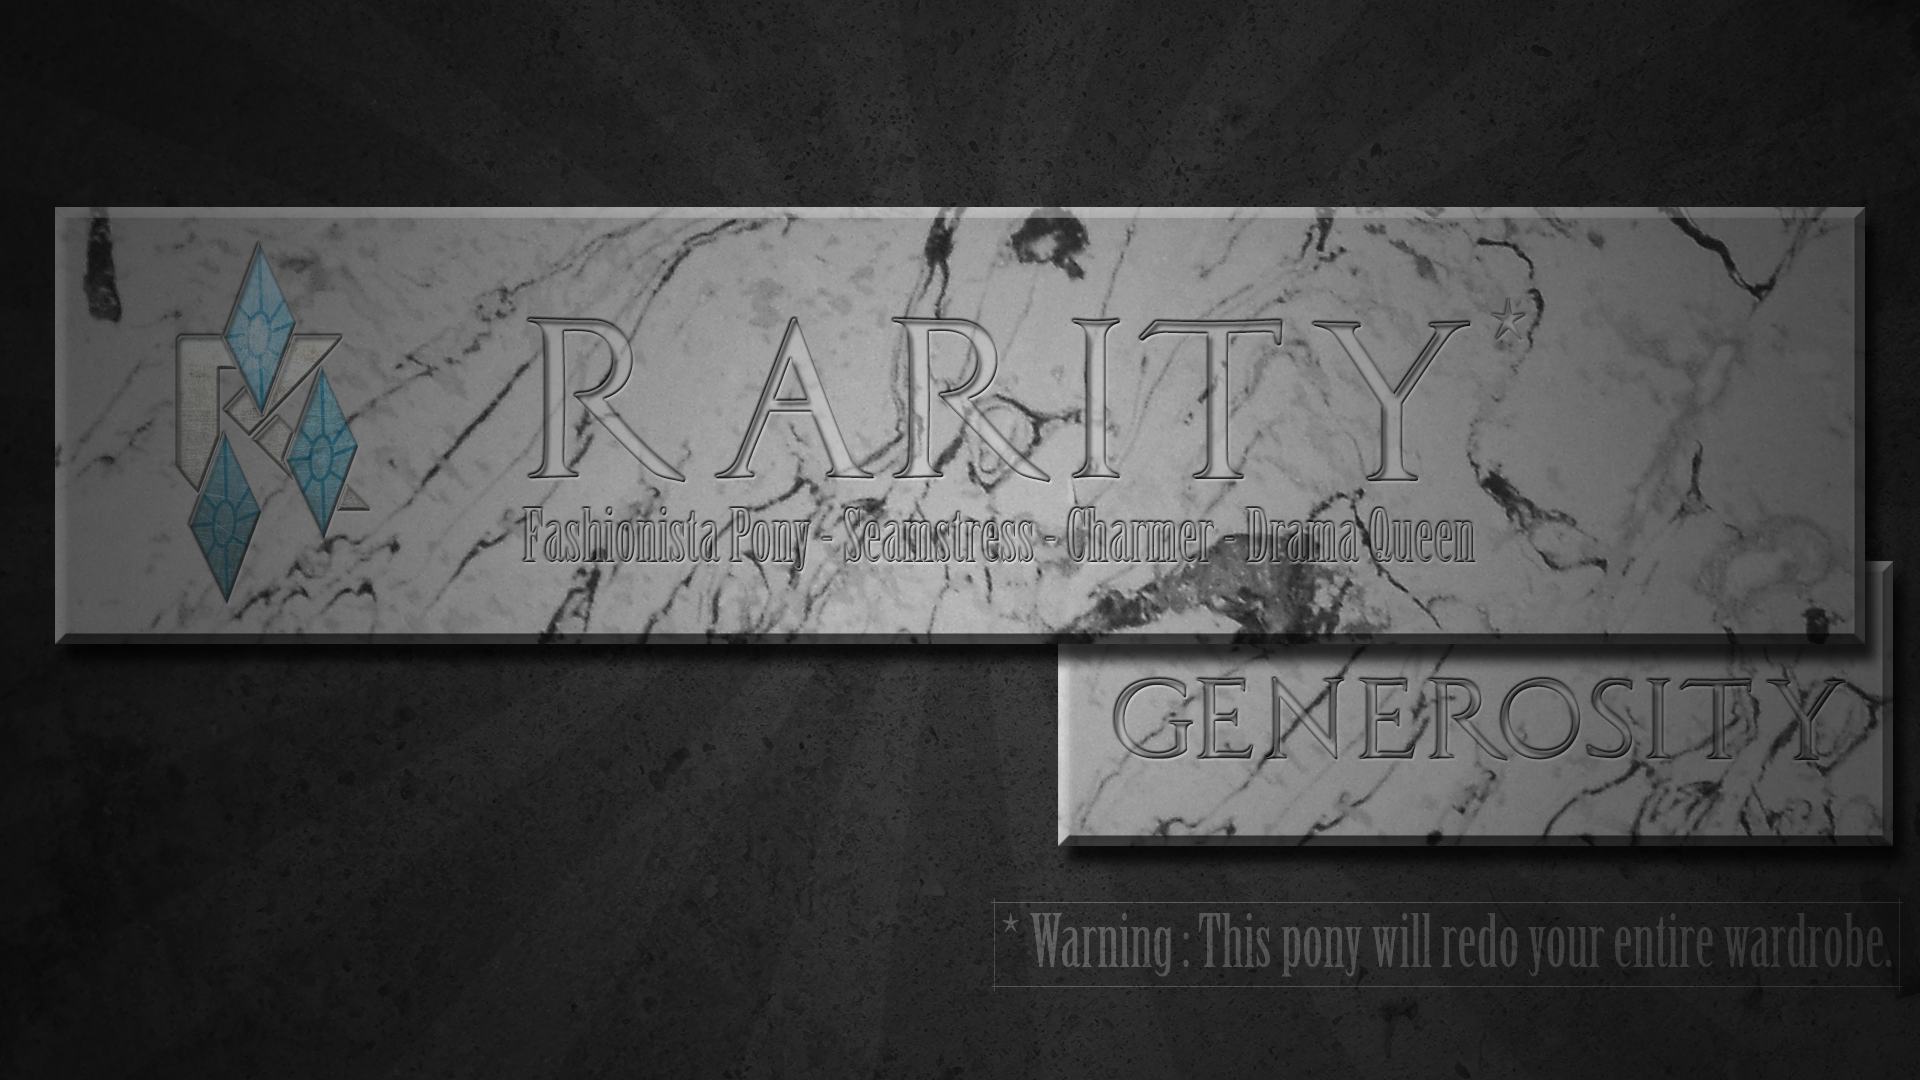 Rarity - warning banner by BlackGryph0n and pims1978